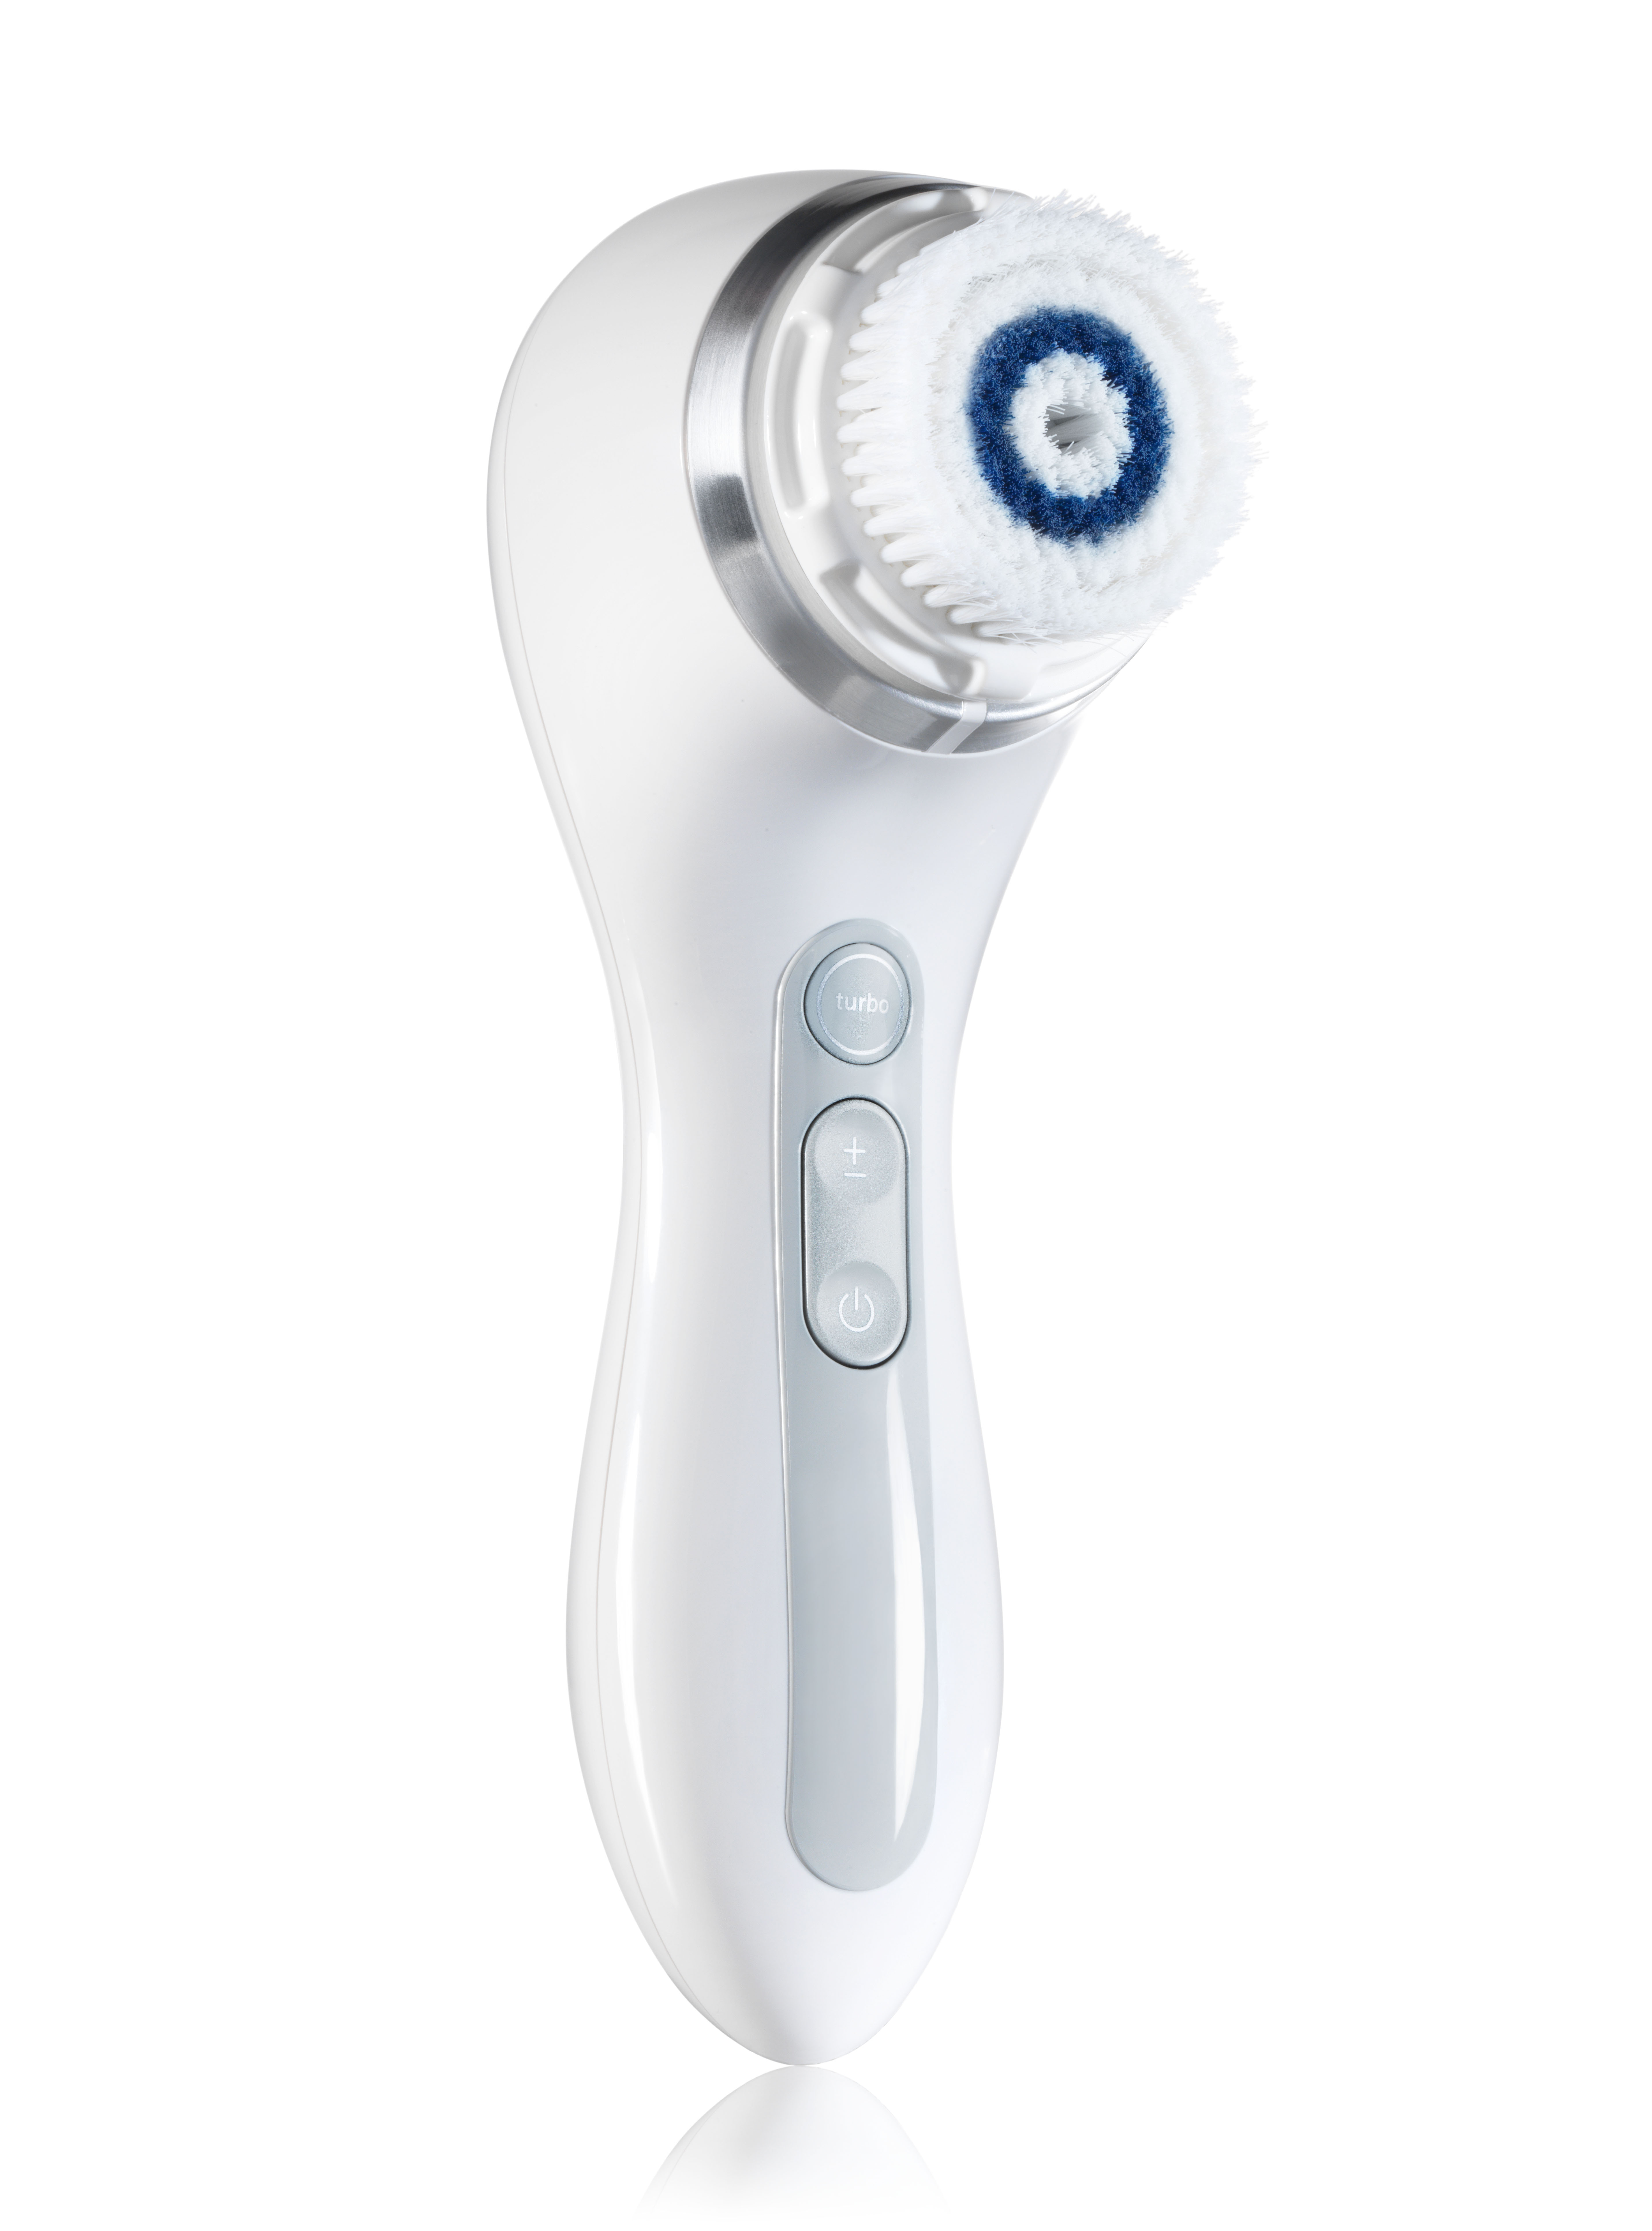 The Top 3 Benefits Of A Clarisonic Brush!